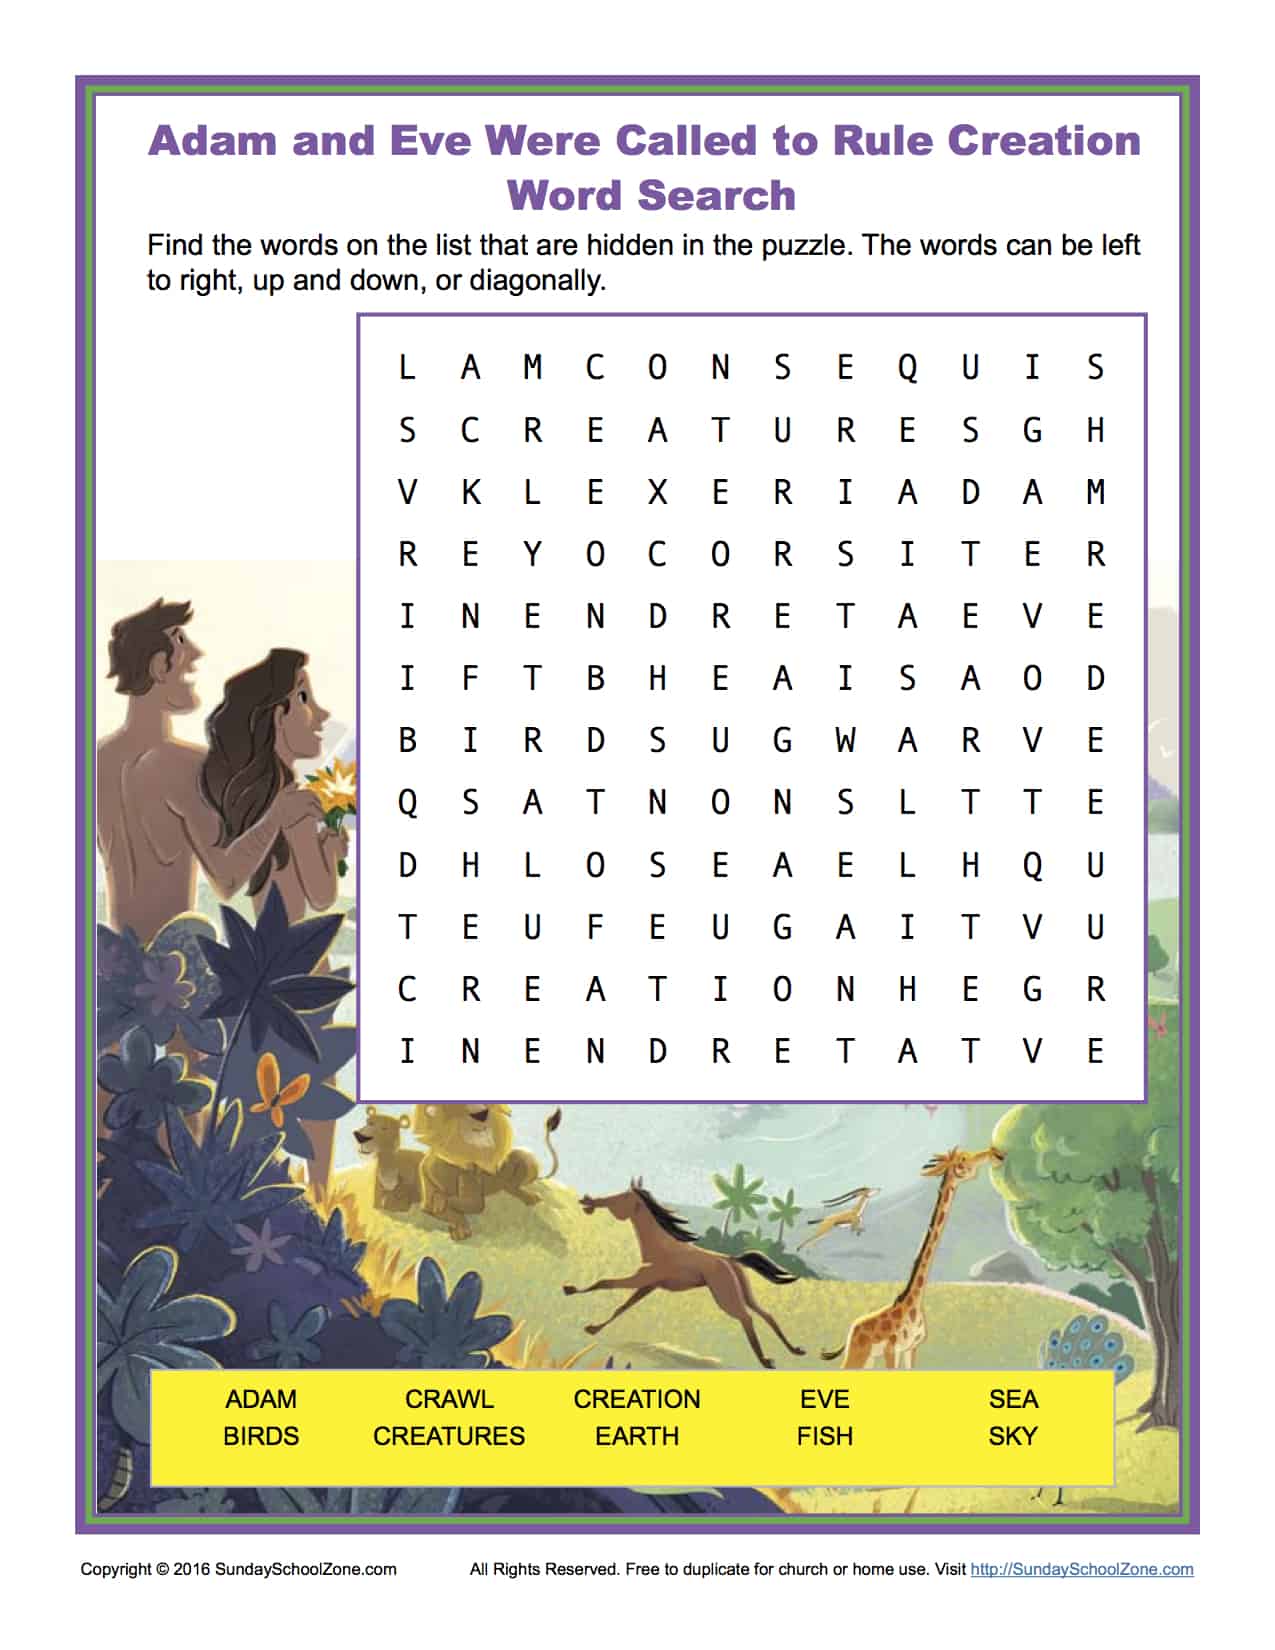 Adam and Eve Were Called to Rule Creation Word Search Children's